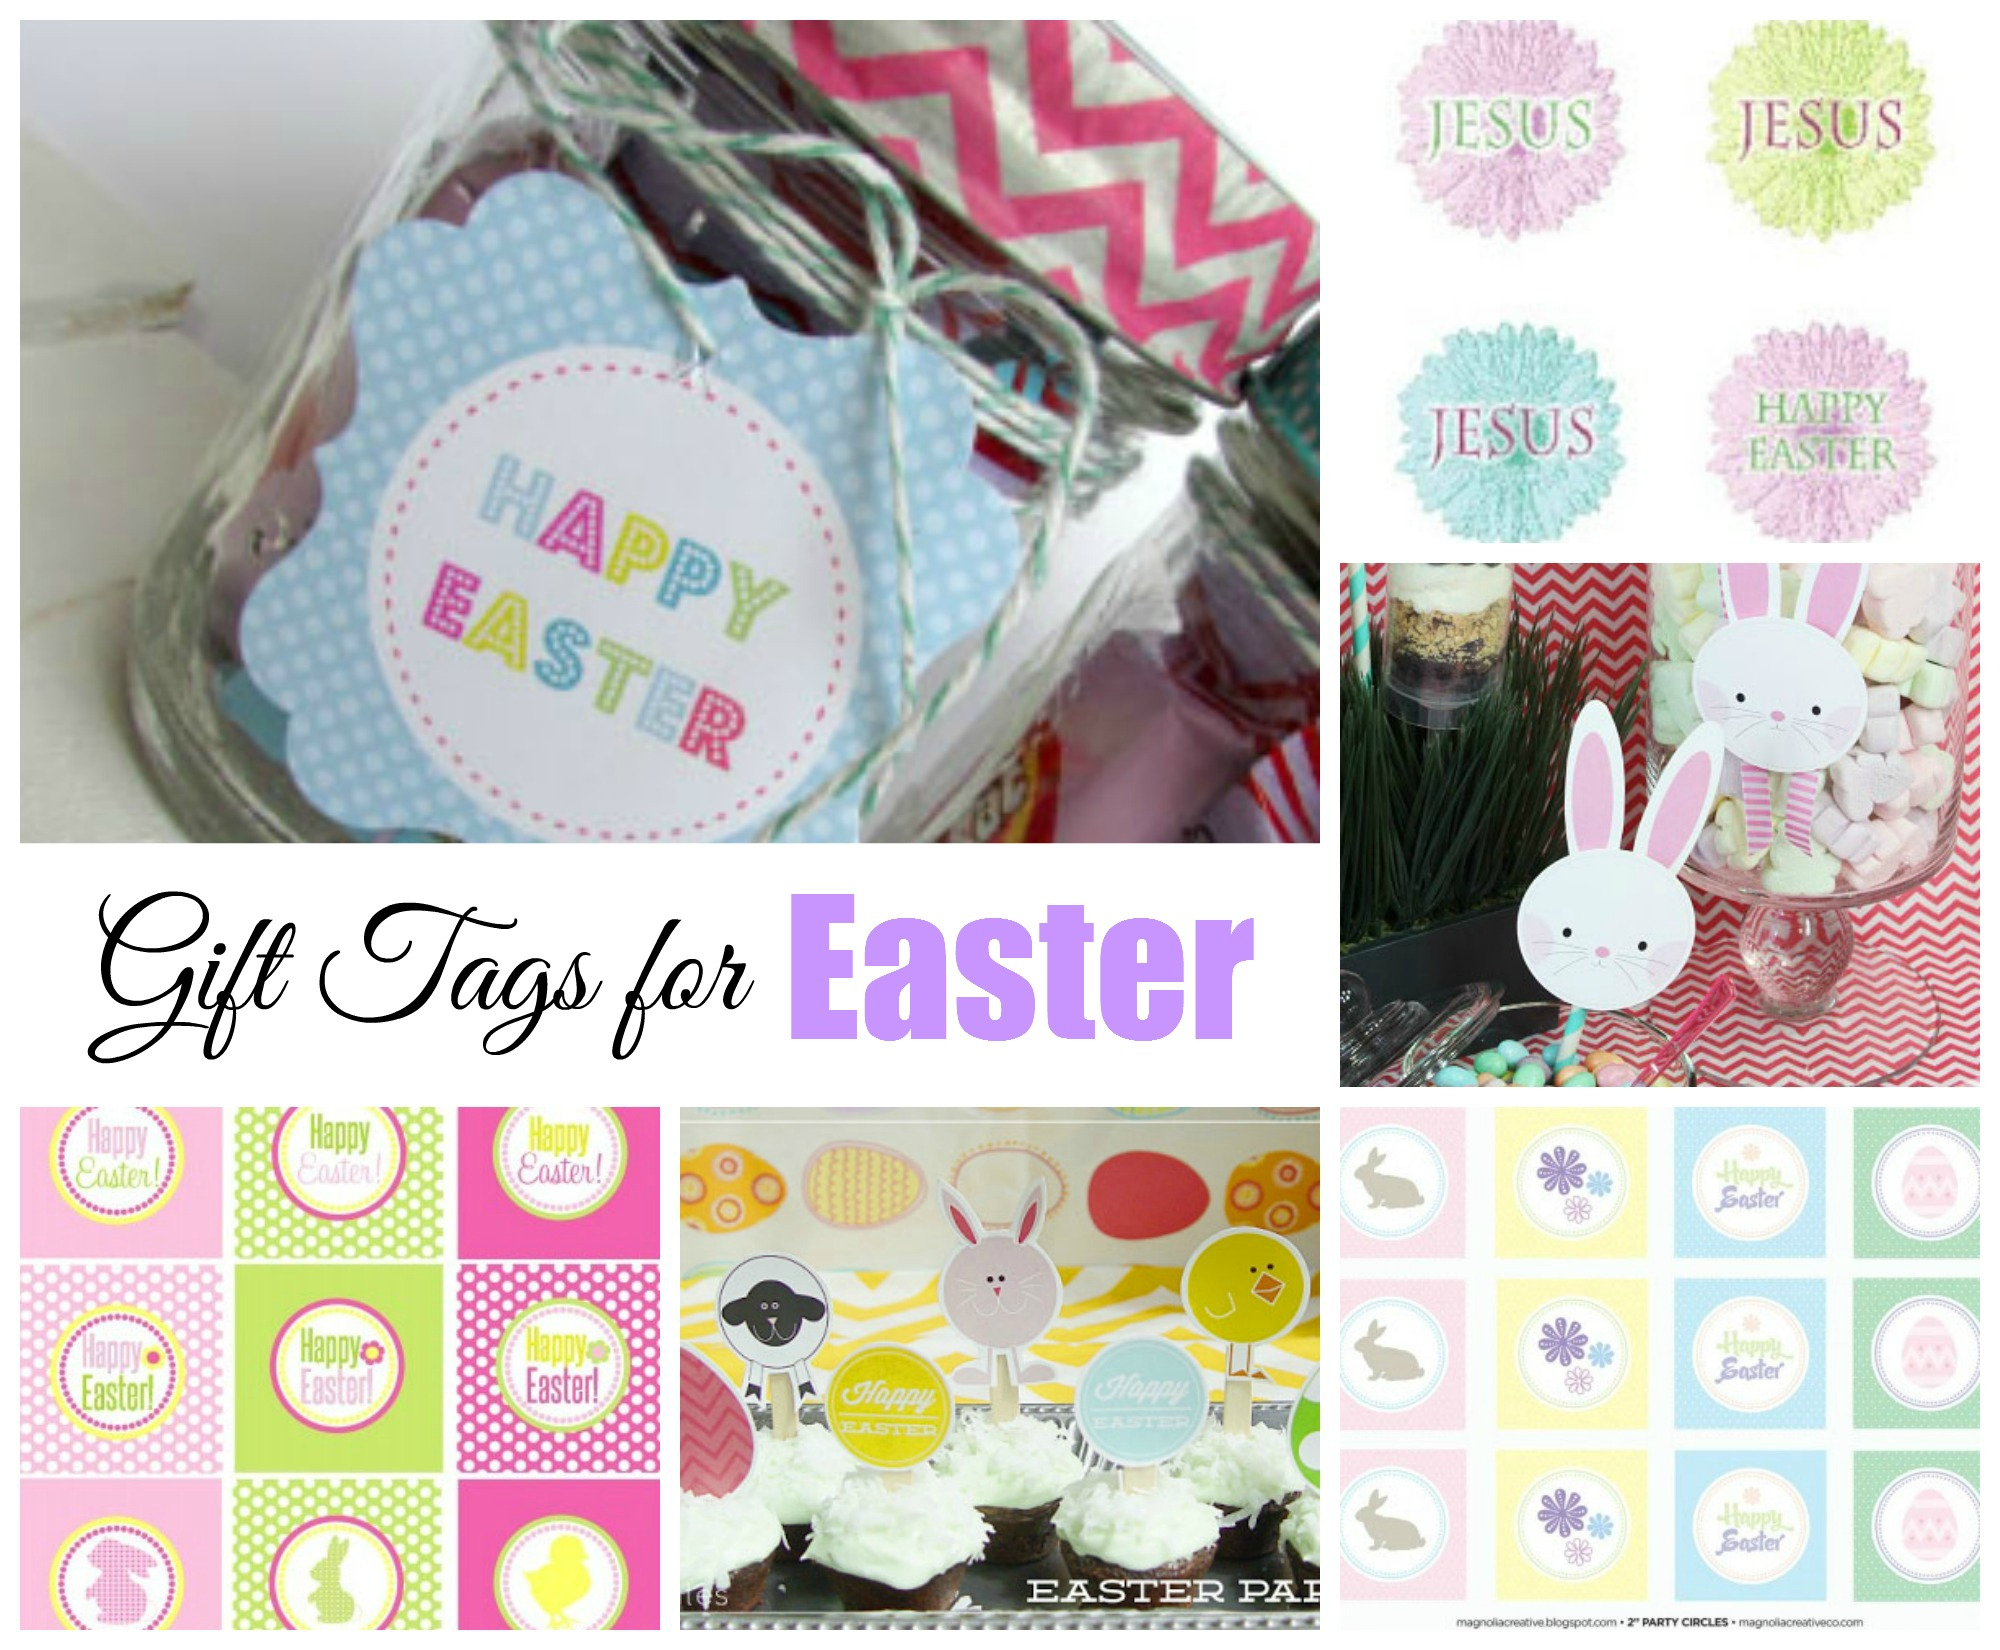 Easter Free Printable Gift Tags | Celebrating Holidays - Free Printable Easter Images